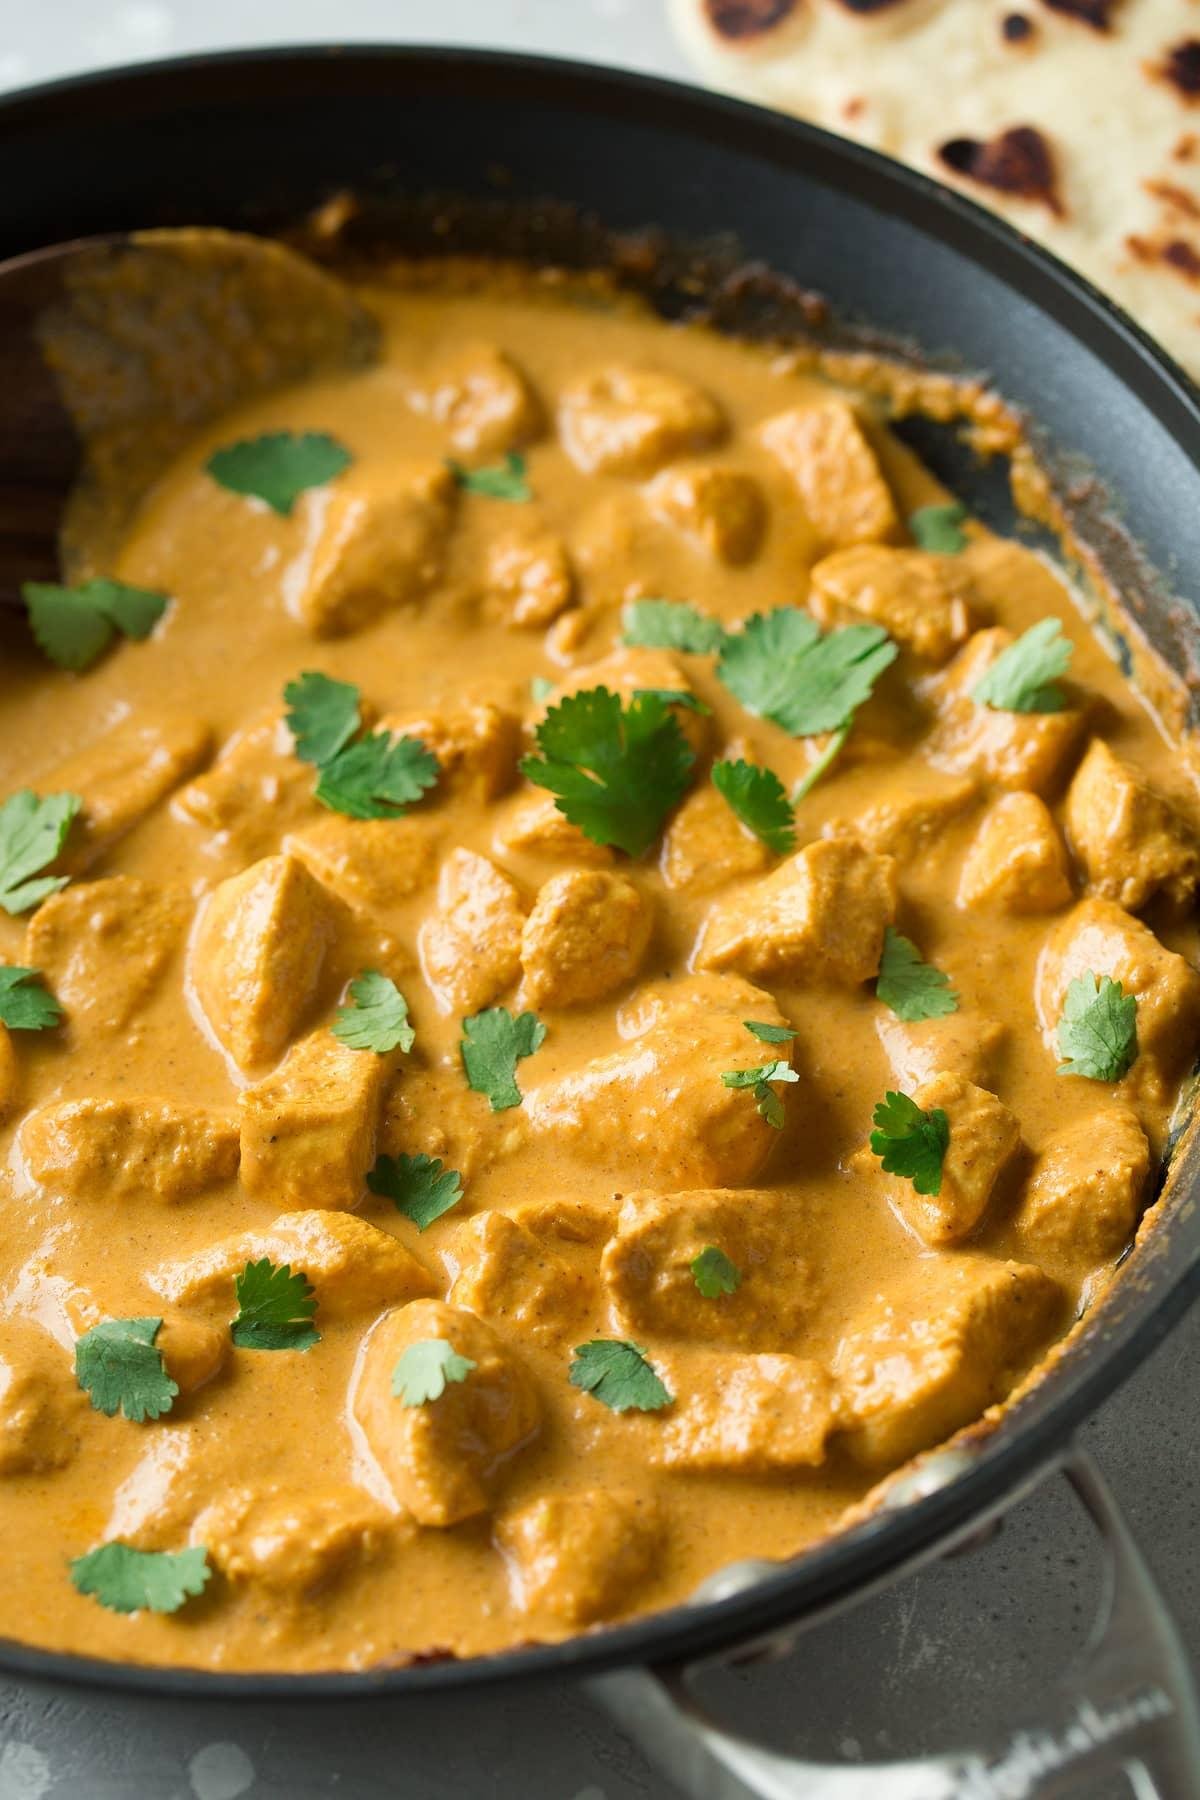 Spice Up Your Weeknight Dinner Routine with This Flavorful Chicken Curry Recipe